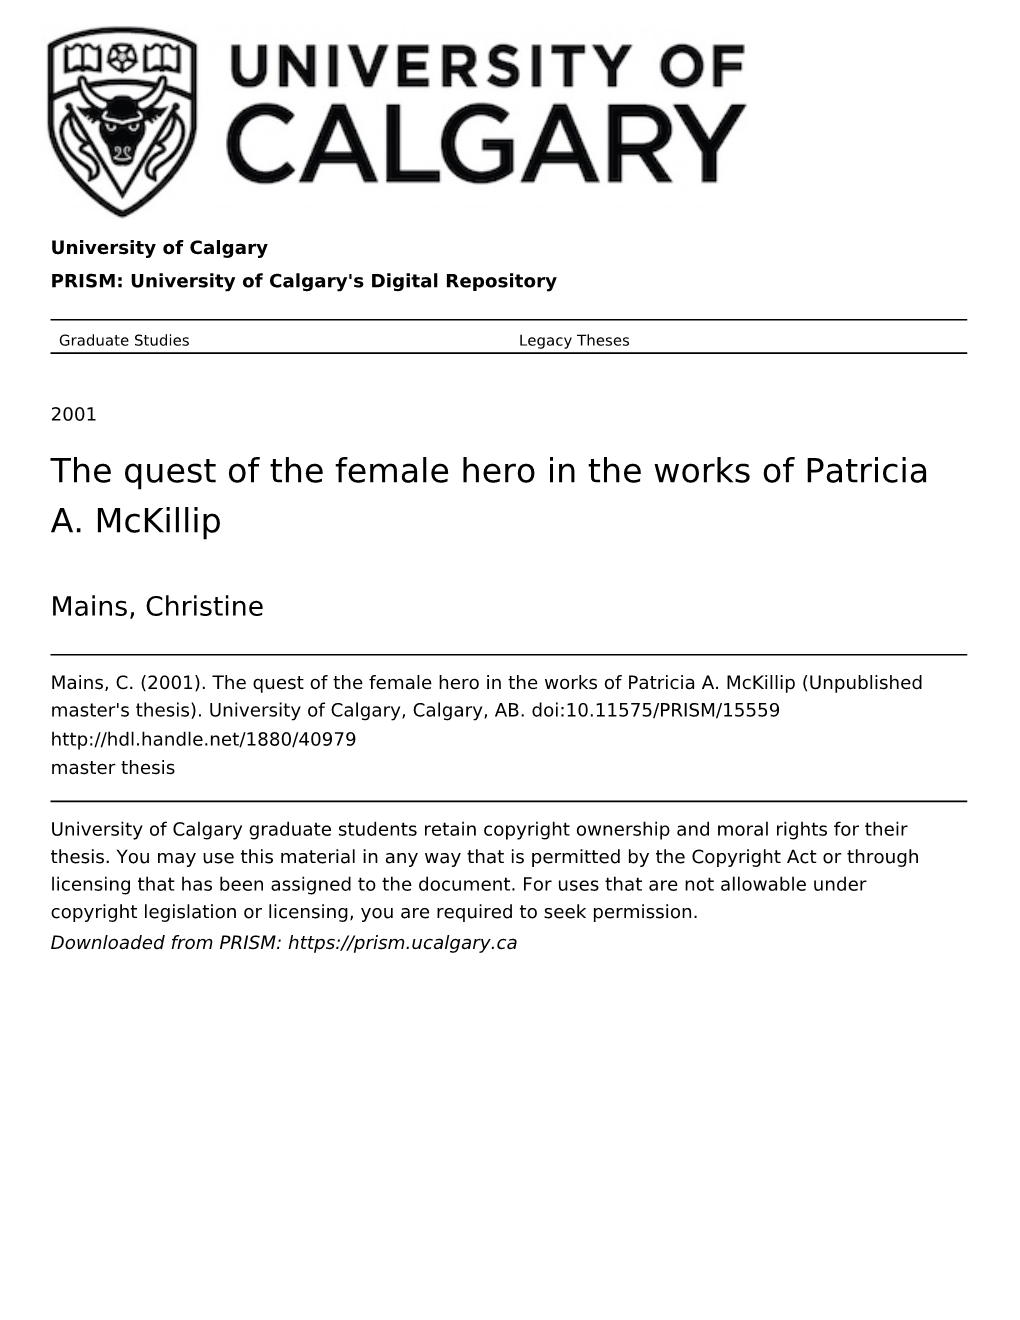 The Quest of the Female Hero in the Works of Patricia A. Mckillip